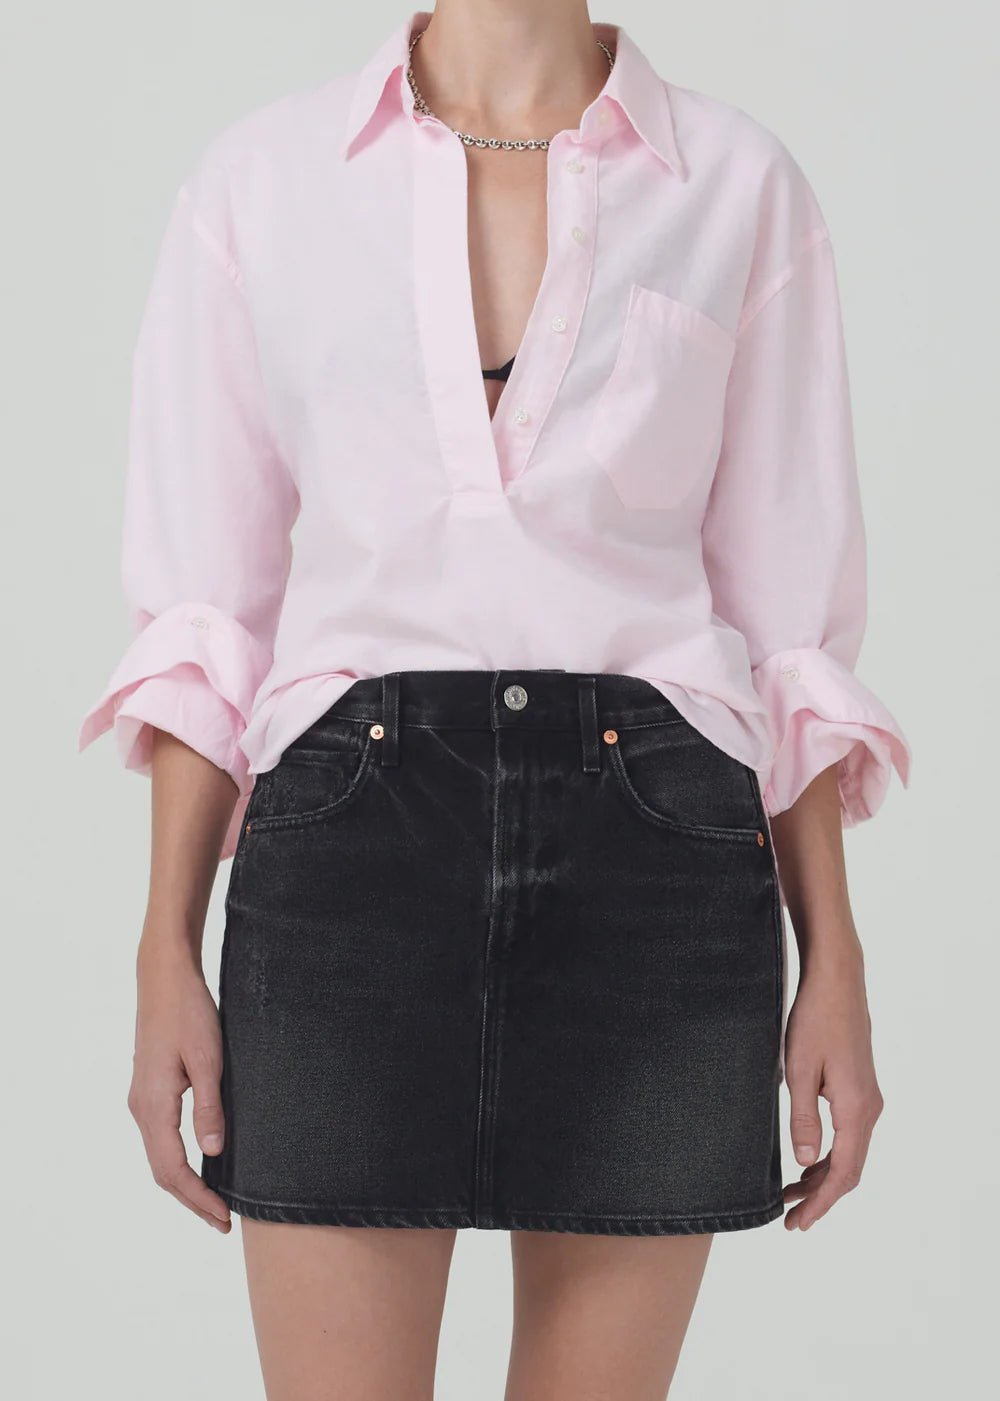 Citizens Of Humanity Aave Oversized Cuff Shirt in Oxford Guava - Estilo Boutique